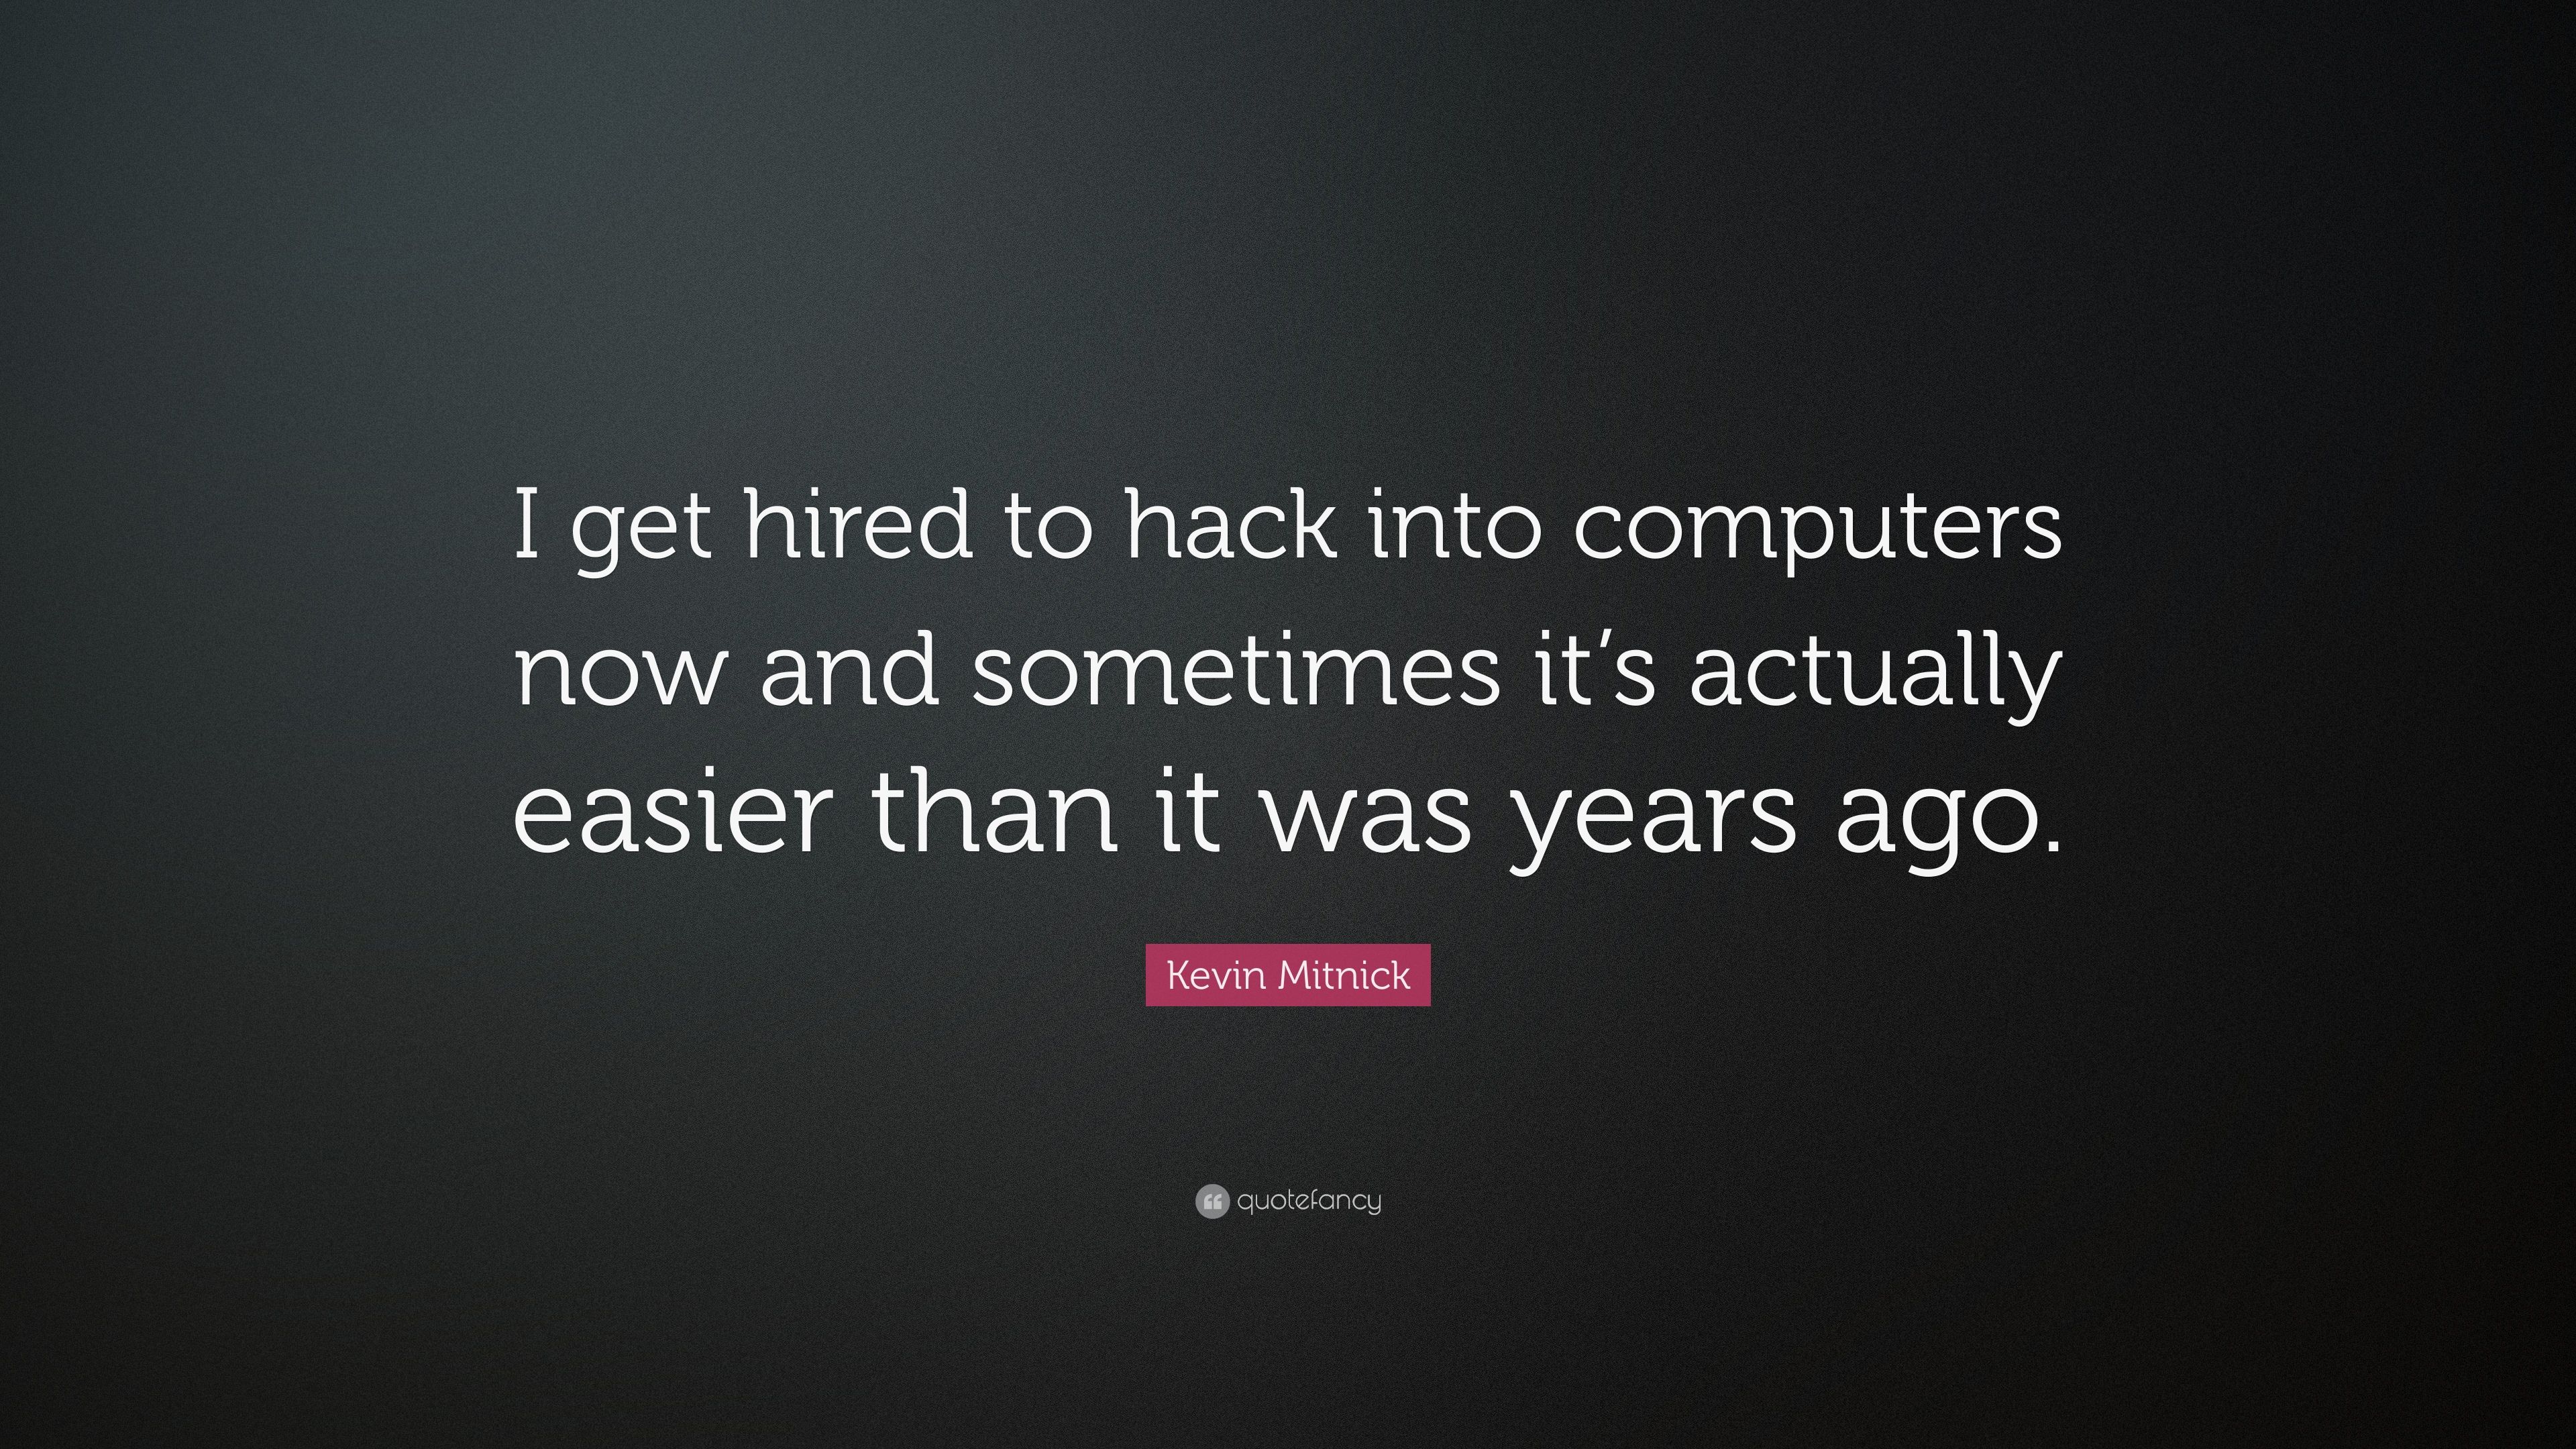 Best Hacker Quotes Wallpaper For Phone